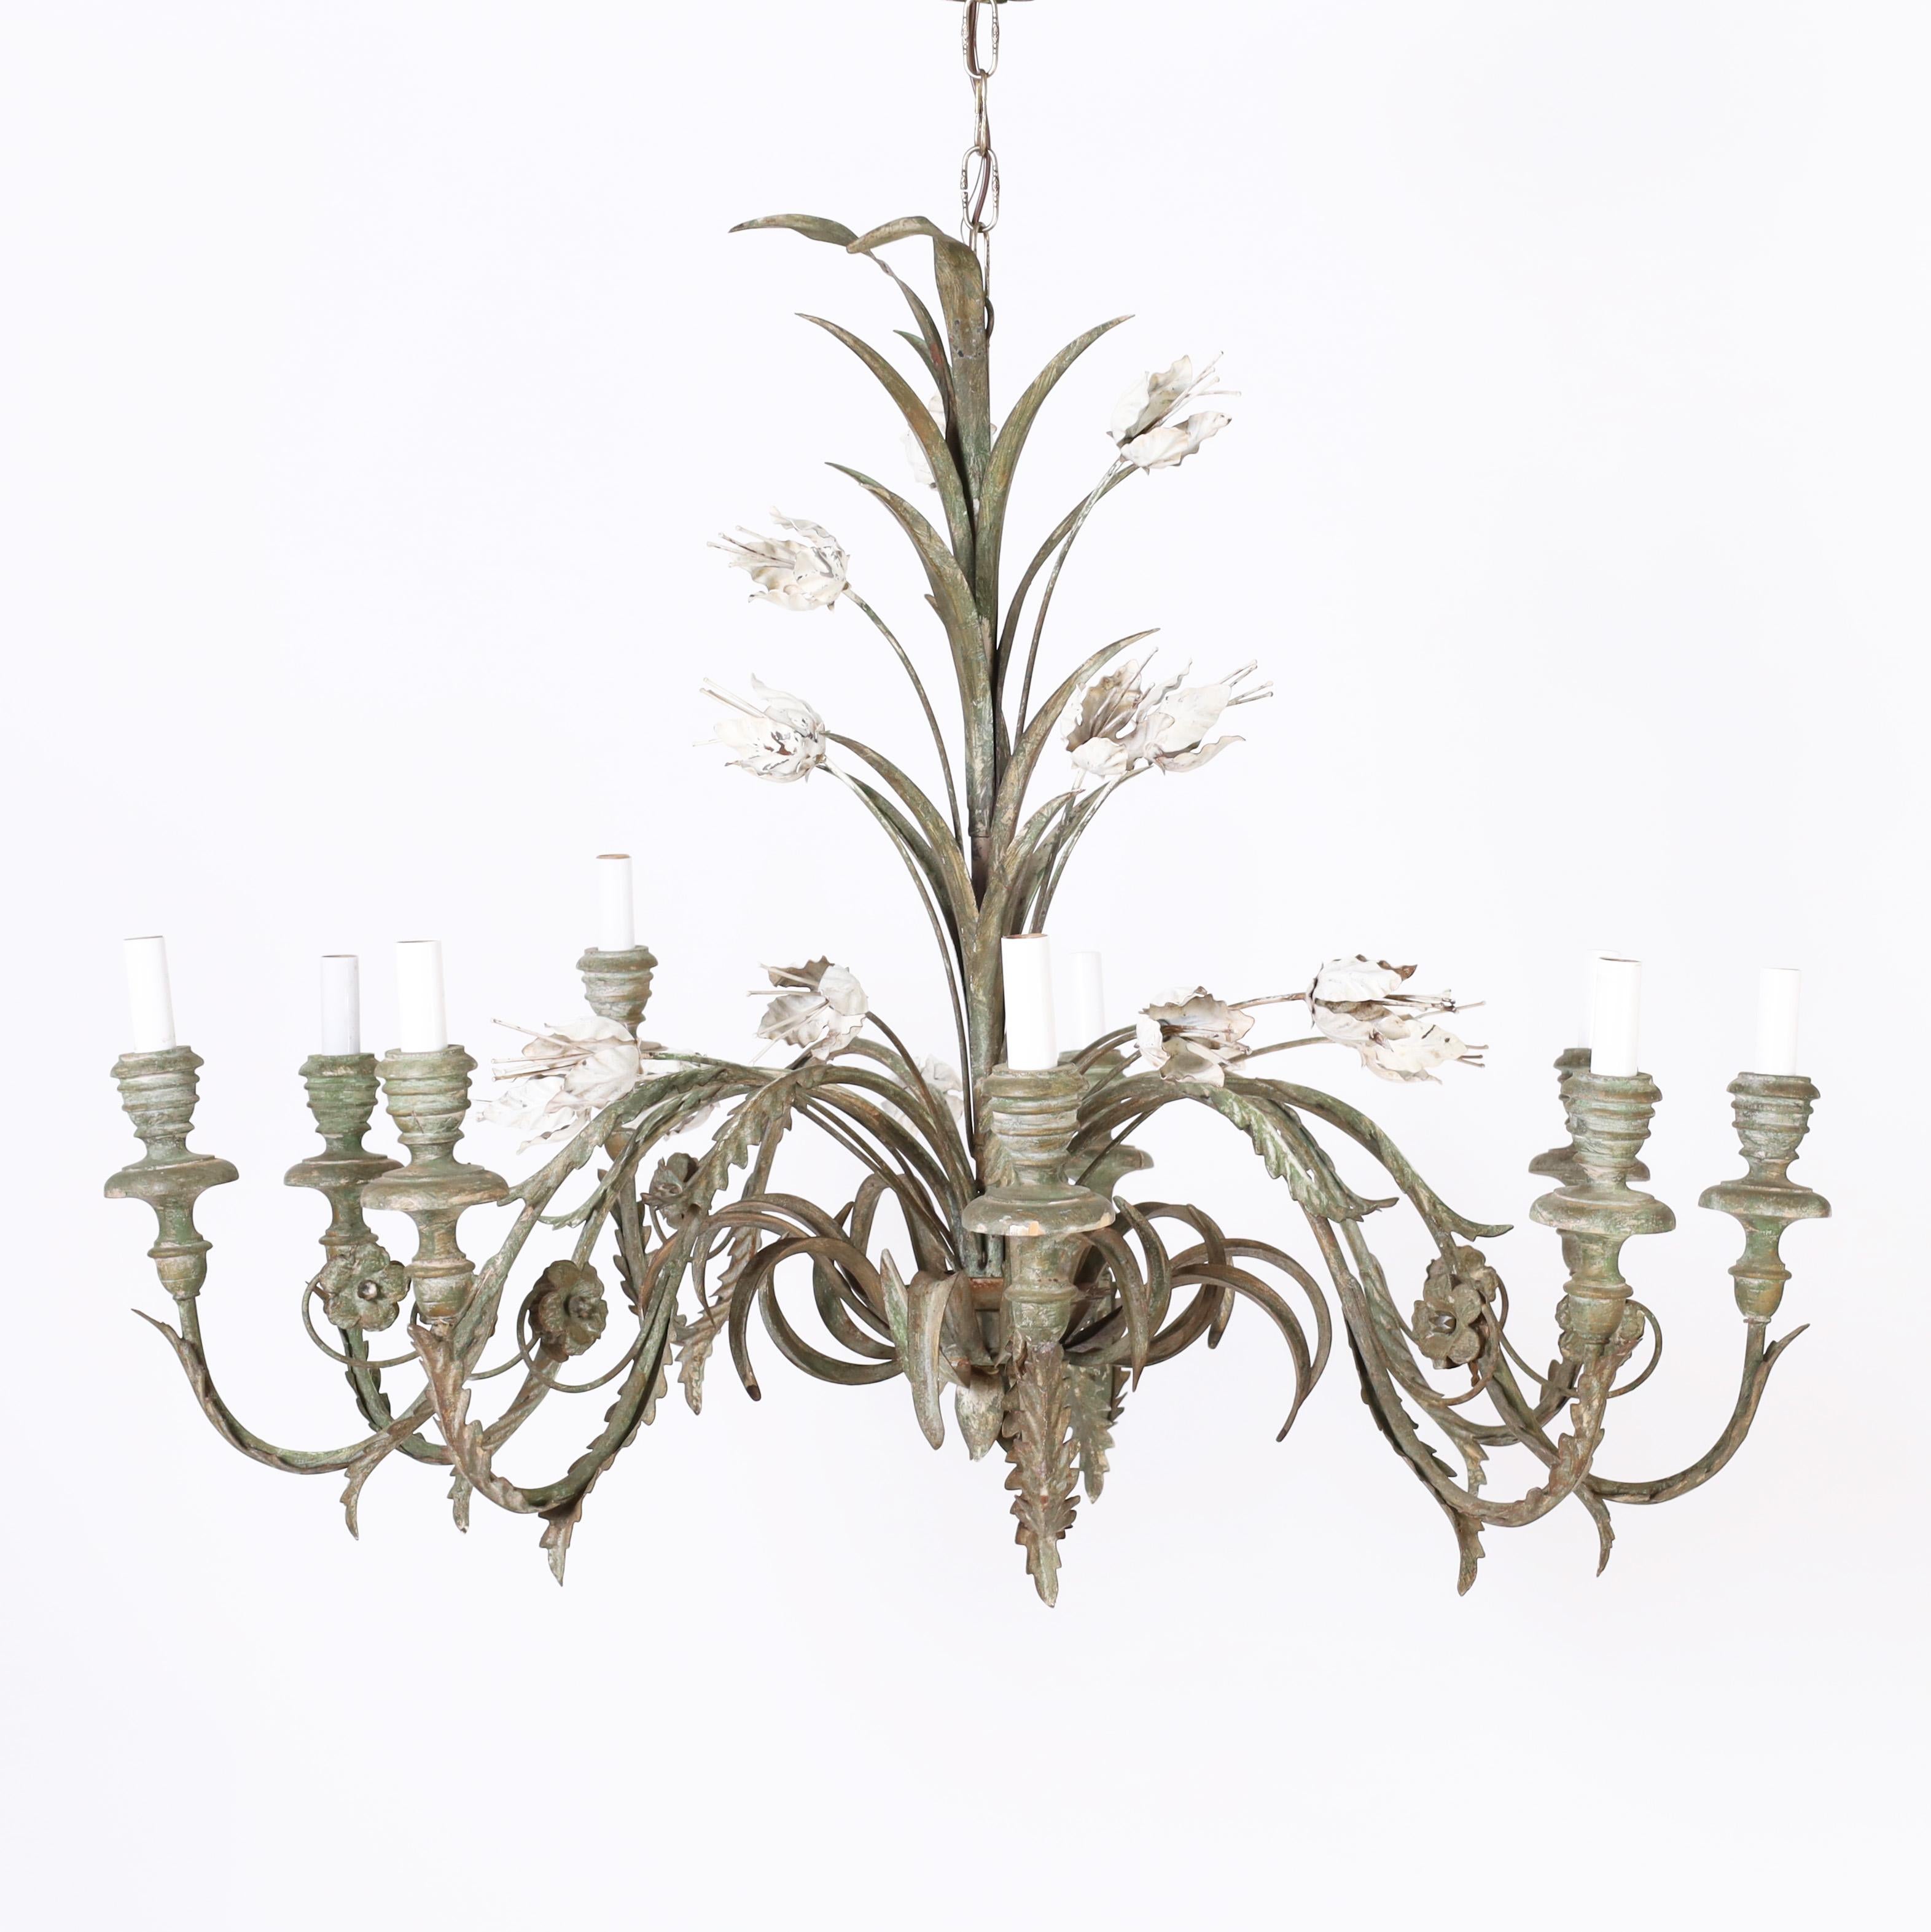 Classic Italian chandelier crafted in metal with a sheaf shaft, nine arms with acanthus leaves and flowers and turned wood candle cups, all with a worn oxidized painted finish and featuring white enamel tulips.